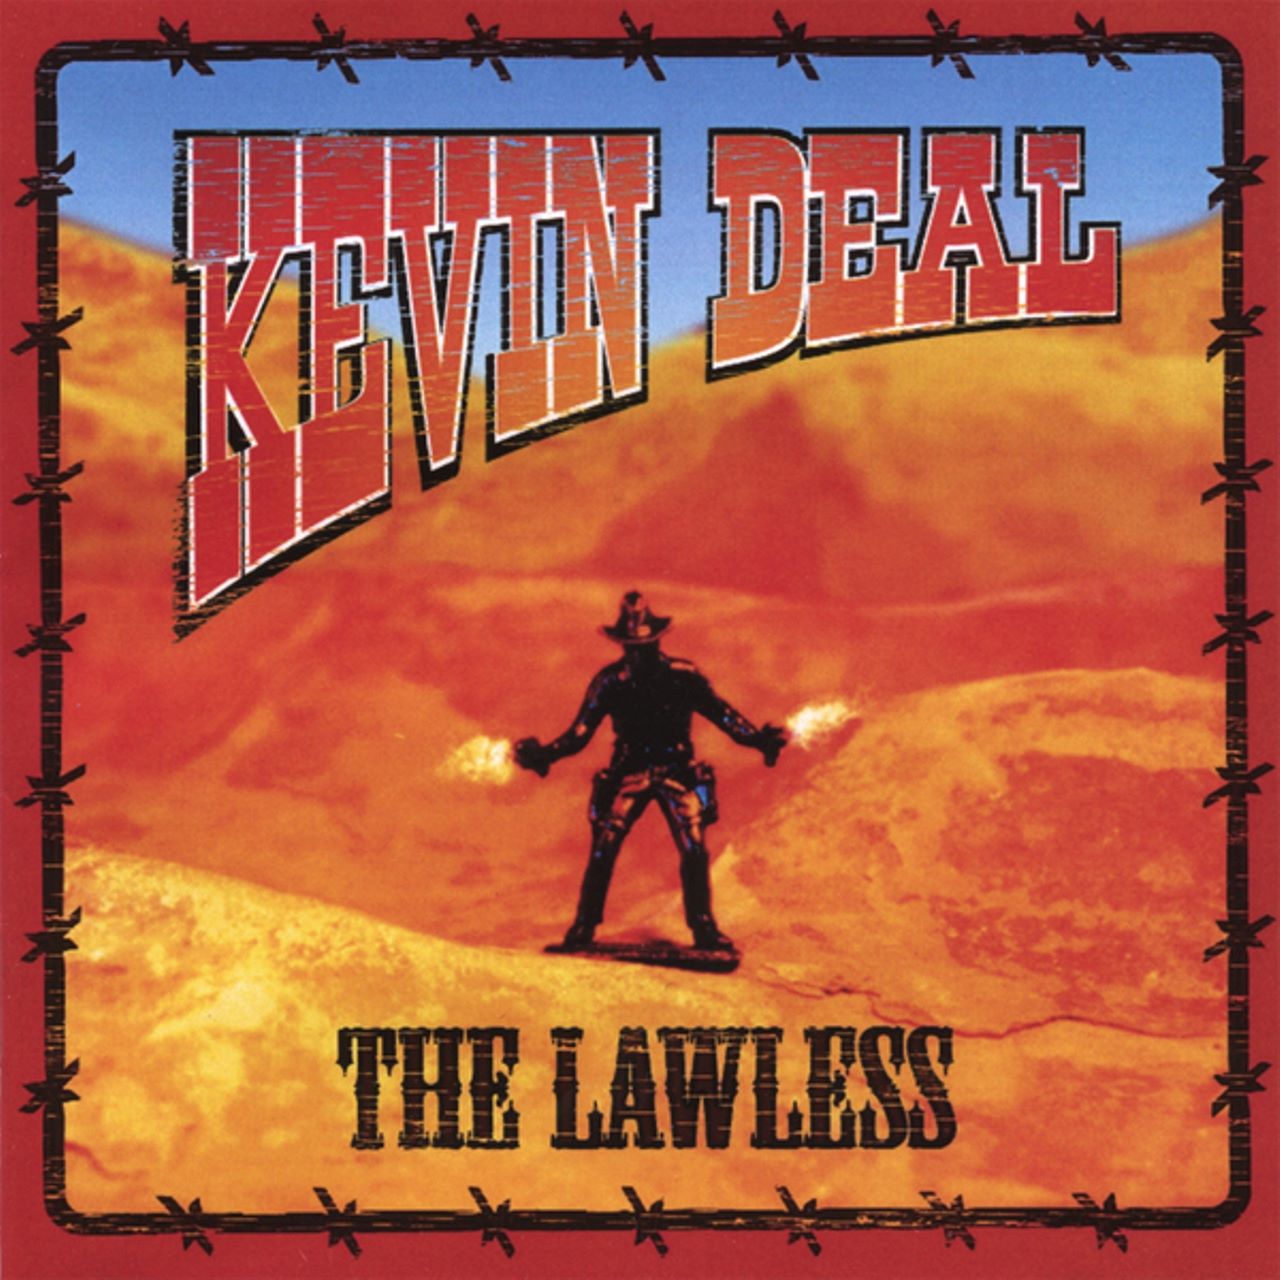 Kevin Deal - The Lawless covewr album